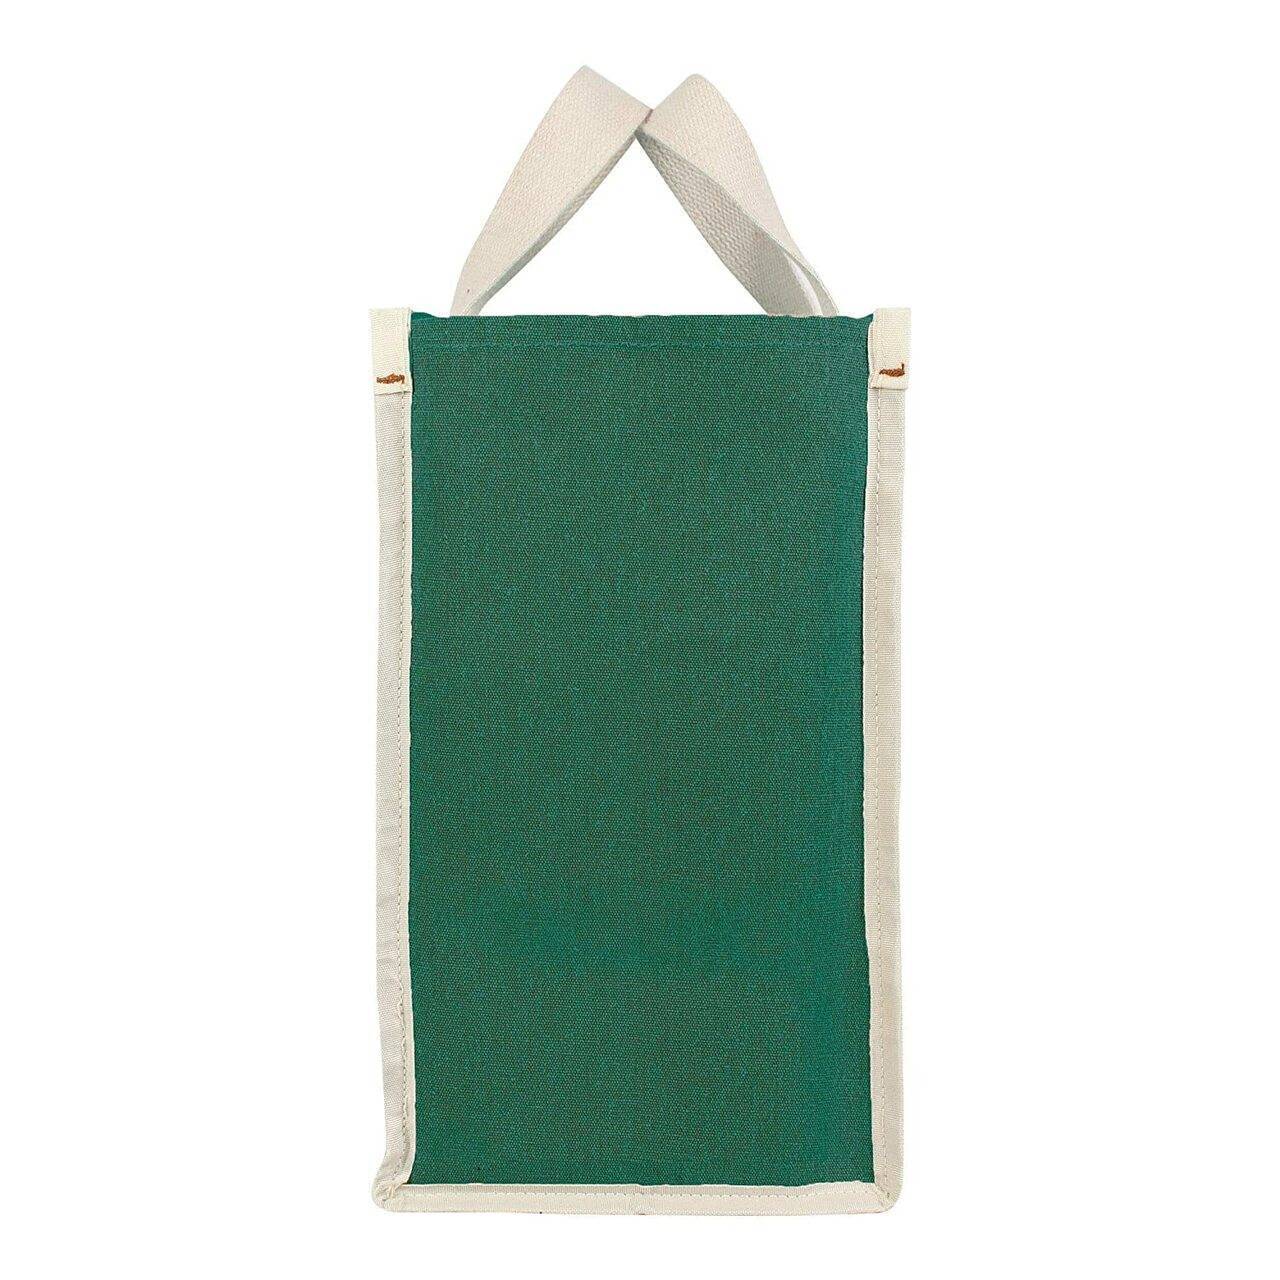 Solance Solapur Eco Cotton Shopping Bags for Carry Milk Grocery Fruits  Vegetable with Reinforced Handles jhola